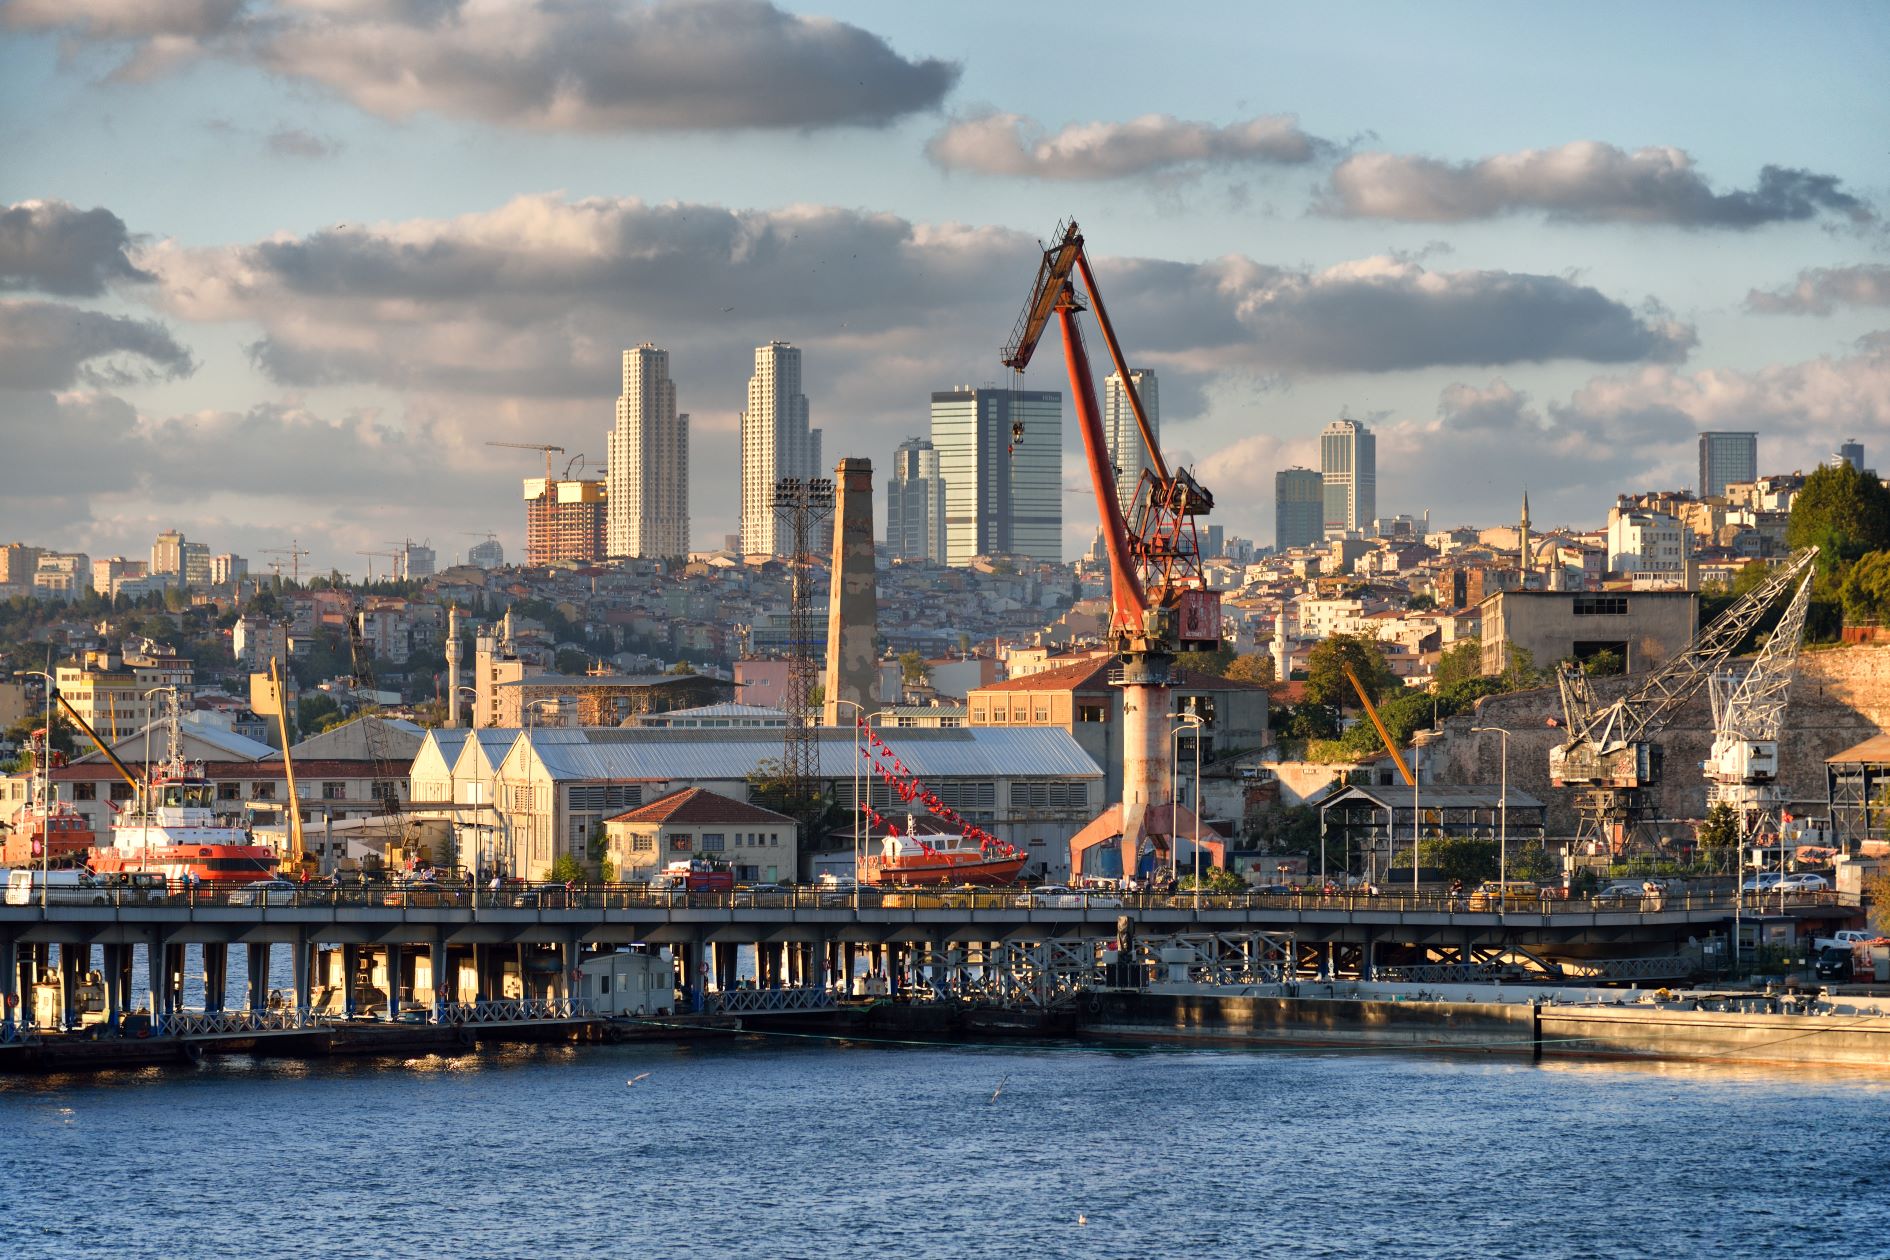 view over the port of Istanbul showing industrial activity